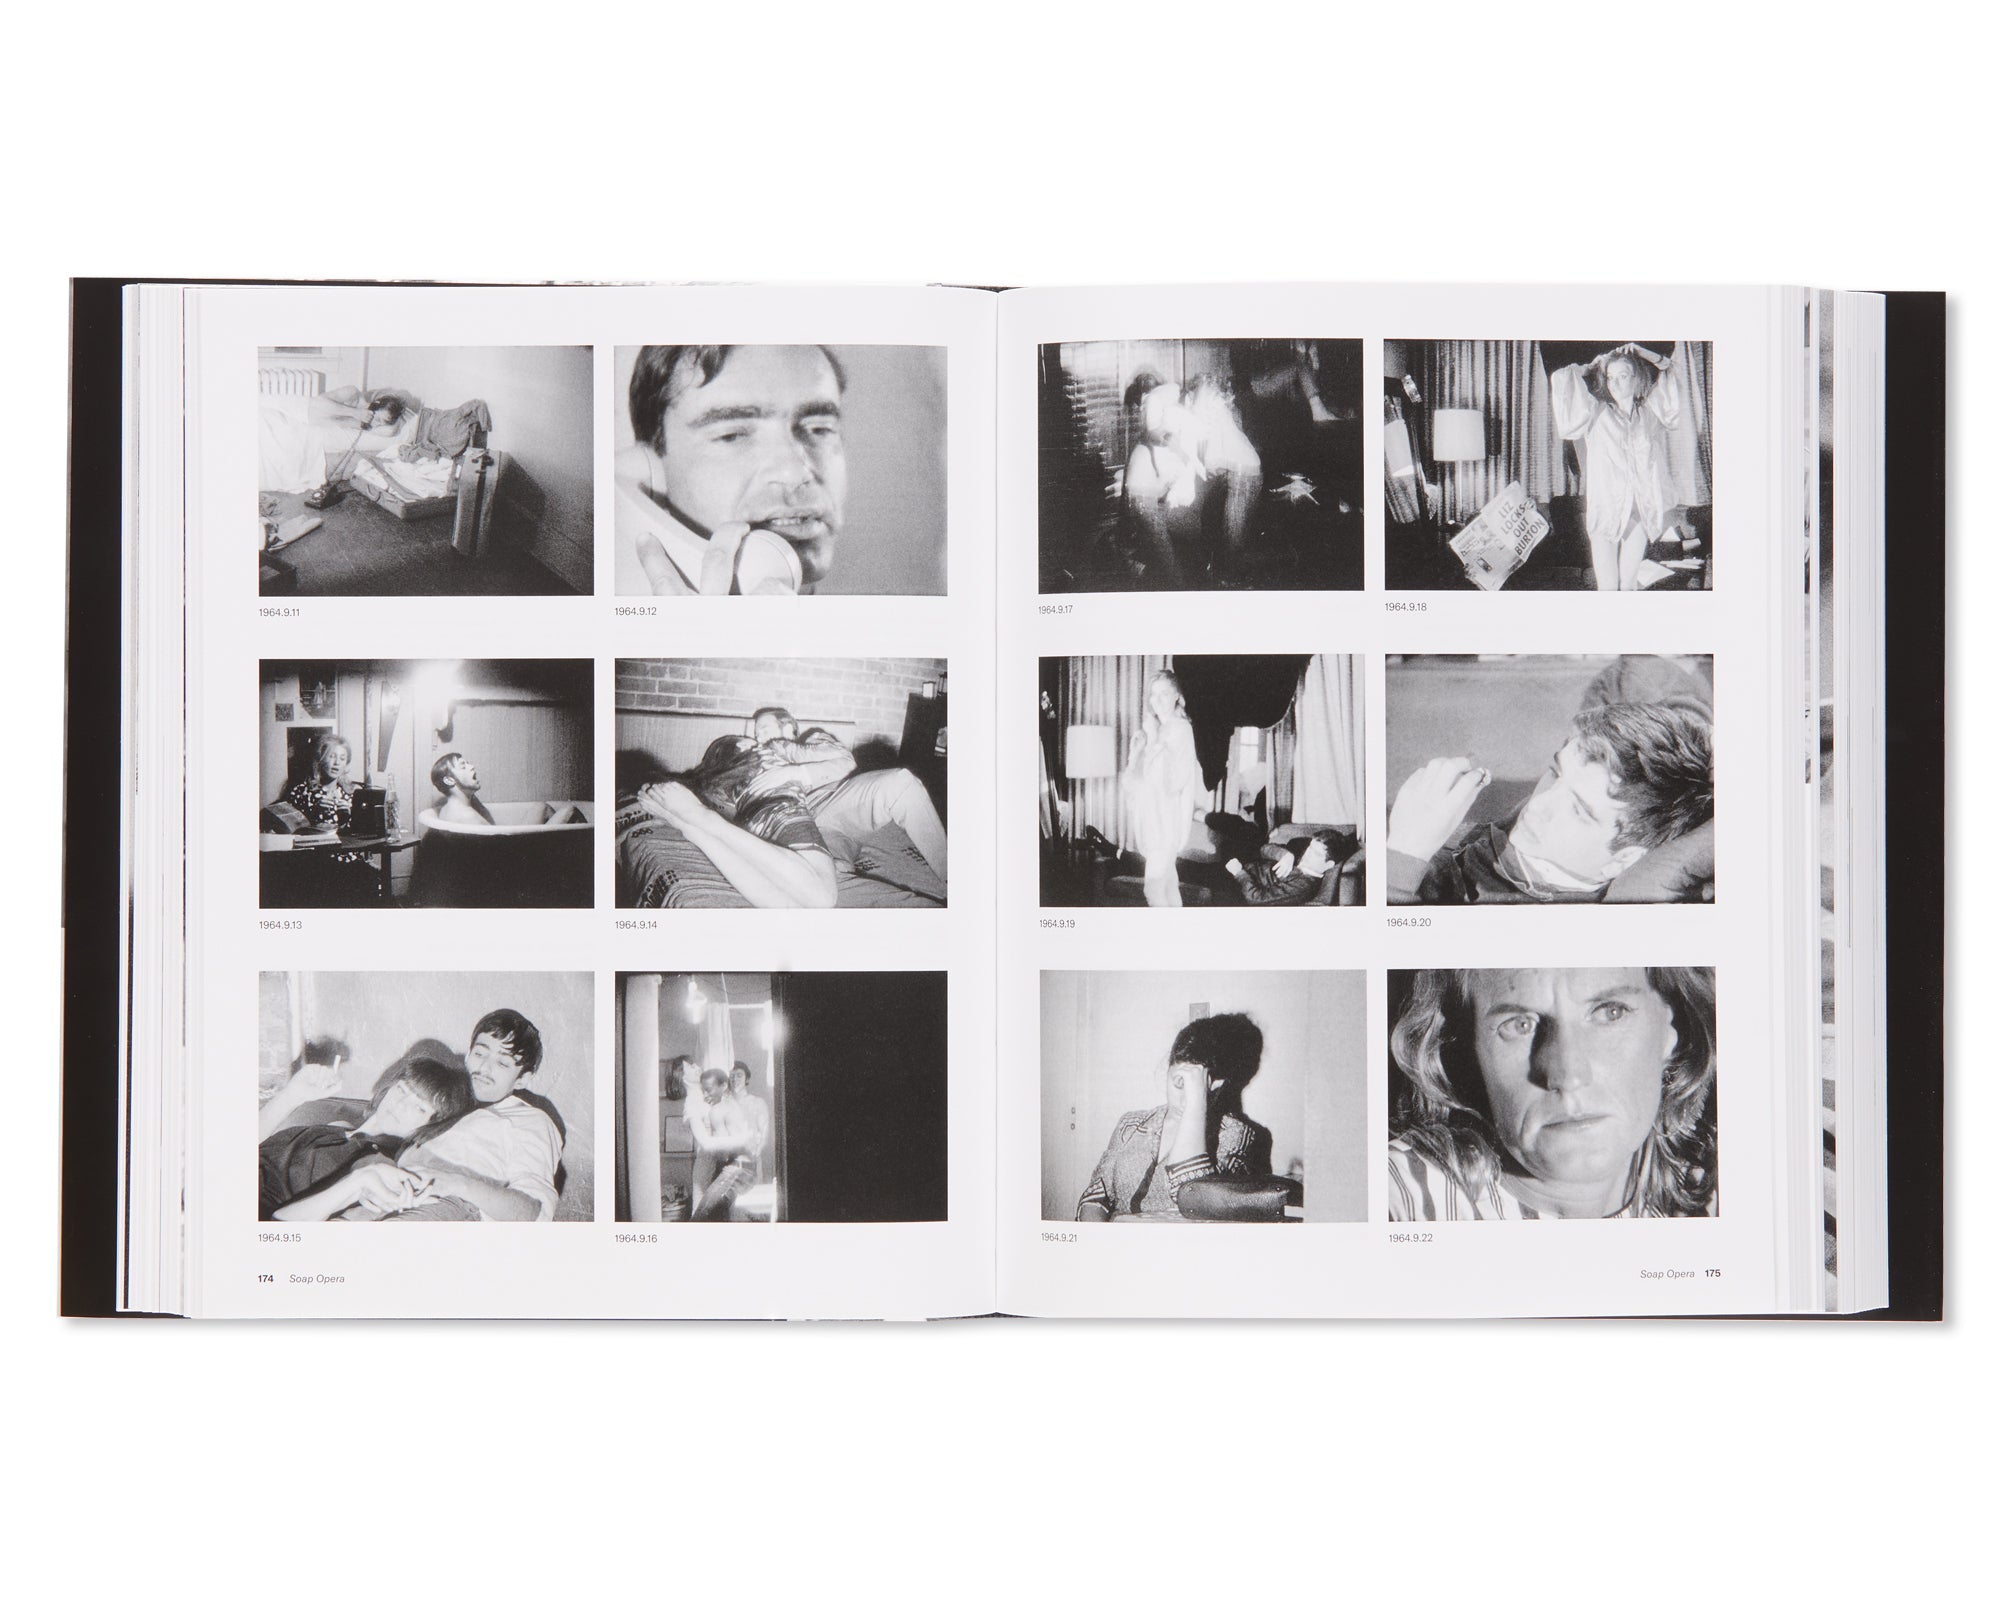 THE FILMS OF ANDY WARHOL CATALOGUE RAISONNE 1963-1965 by Andy Warhol